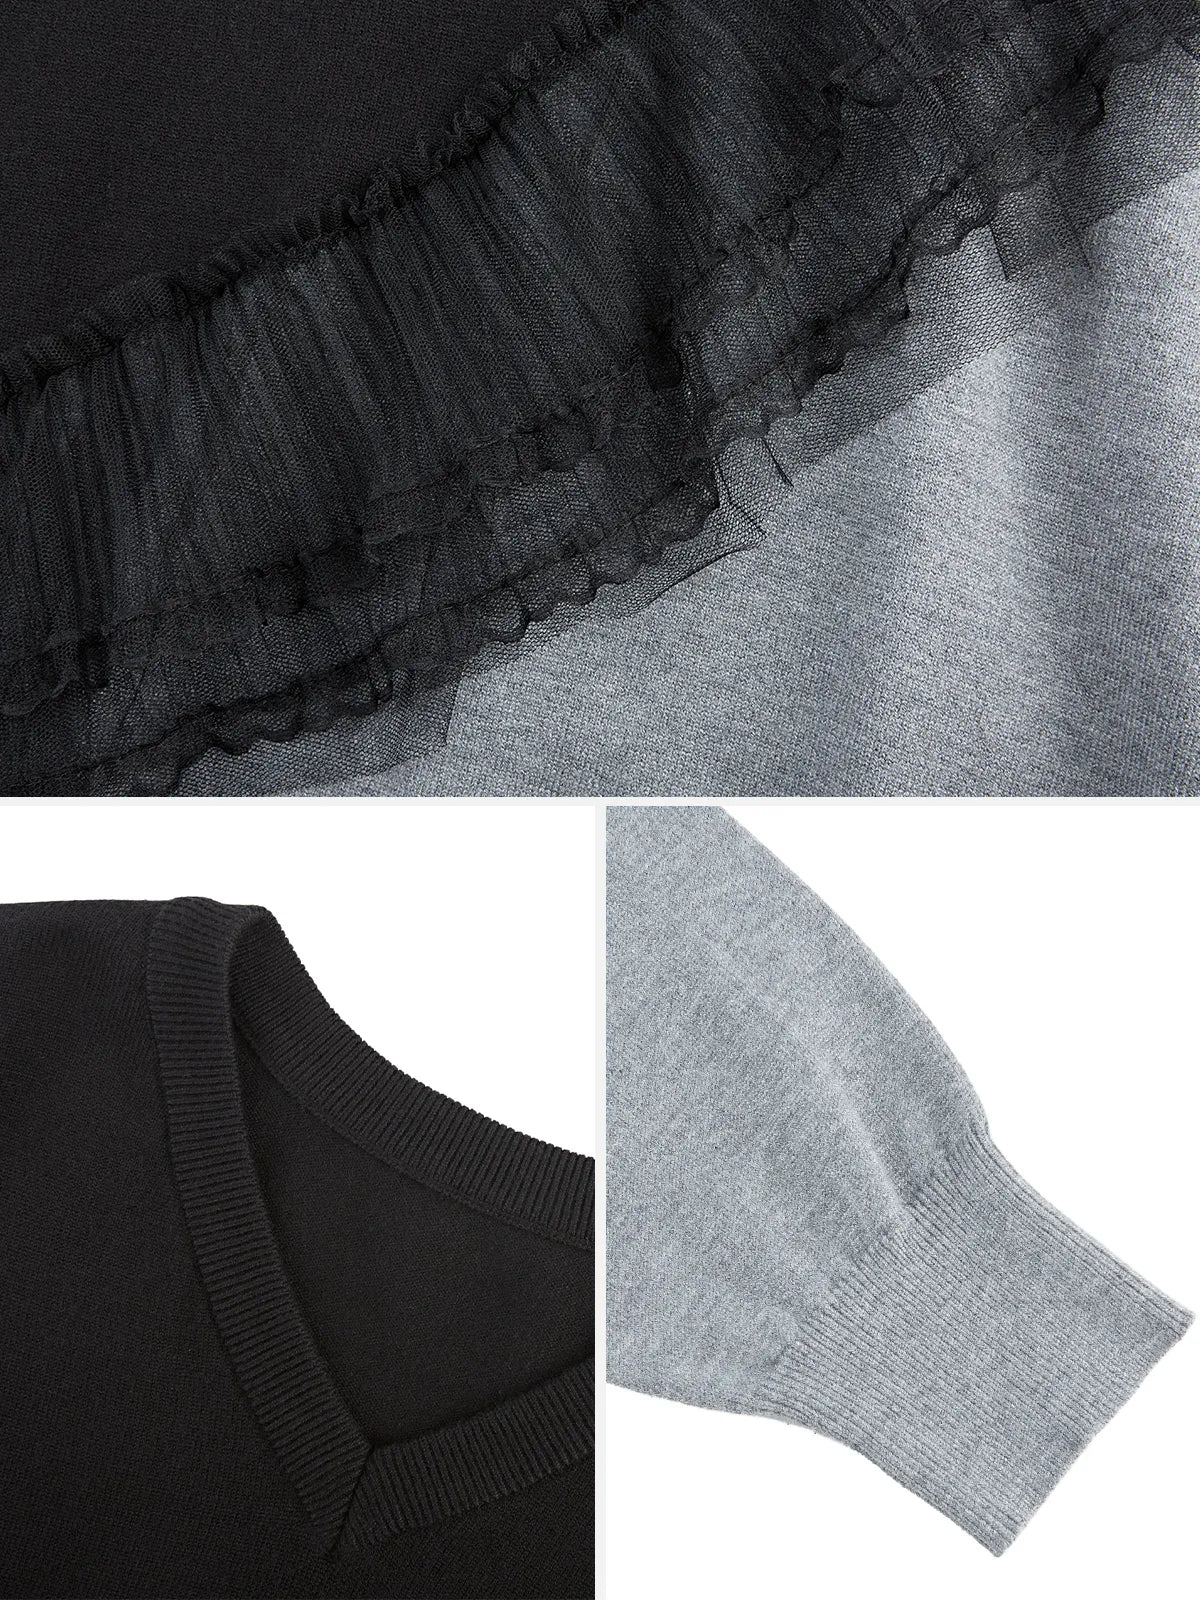  Timeless Fashion: Black and Gray Color-Blocked Sweater with Diagonal Cut